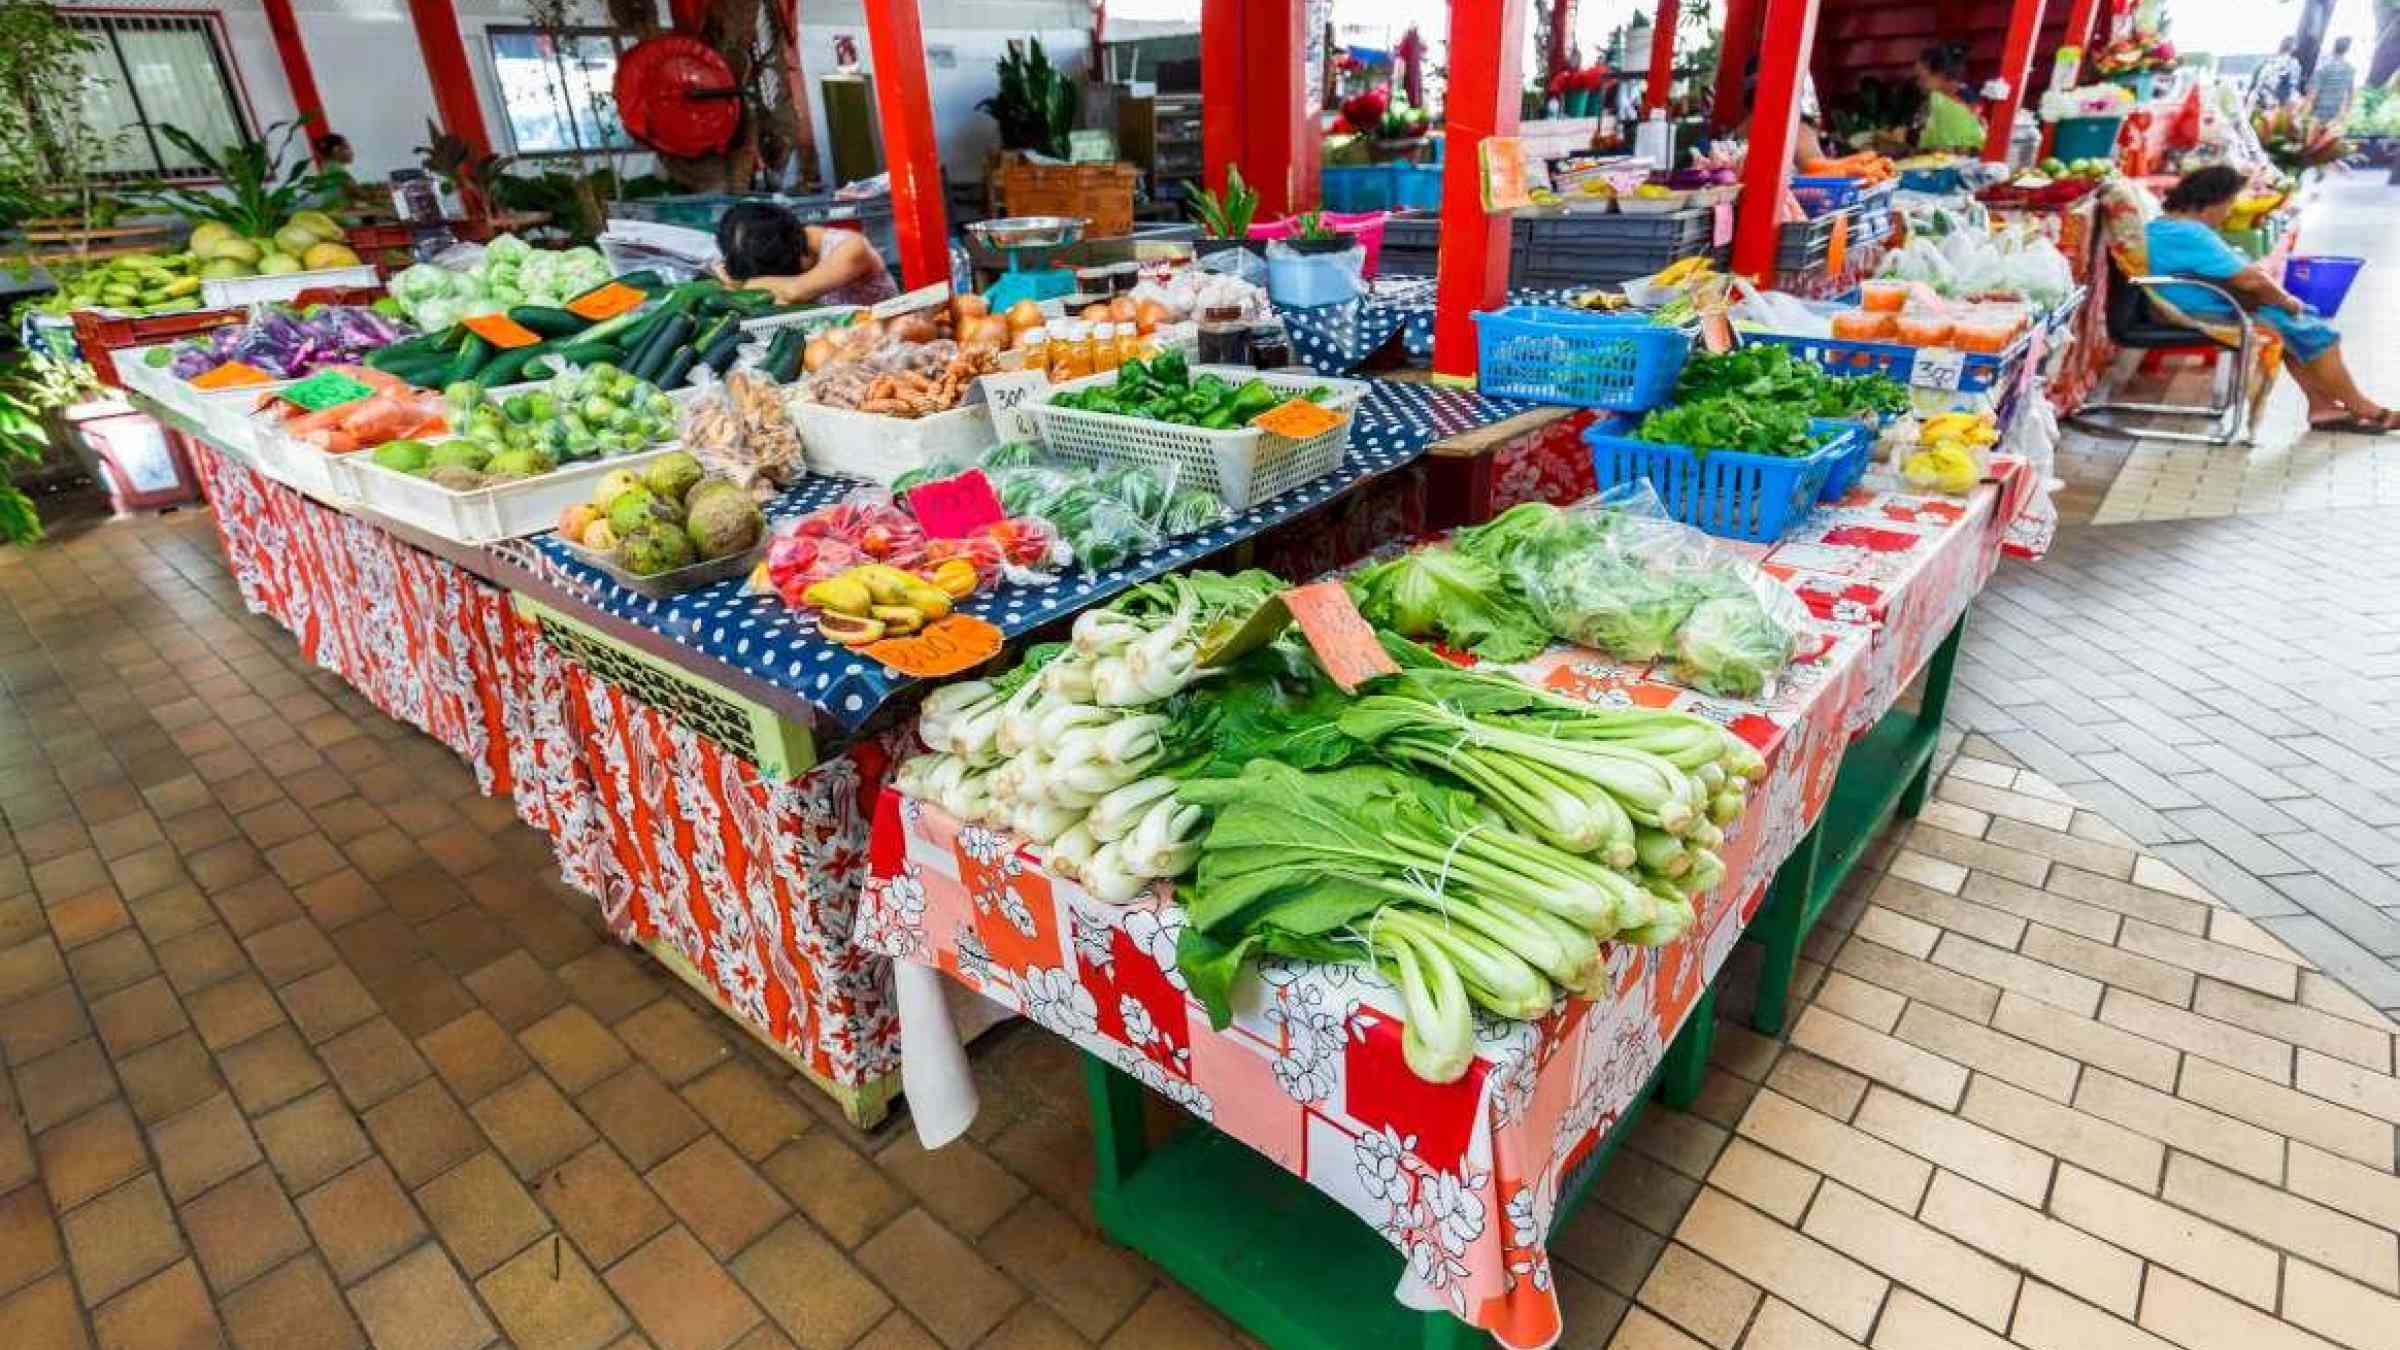 The fresh market in the town of Papeete in Tahiti Papeete, French Polynesia. Sarayuth3390 / Shutterstock.com